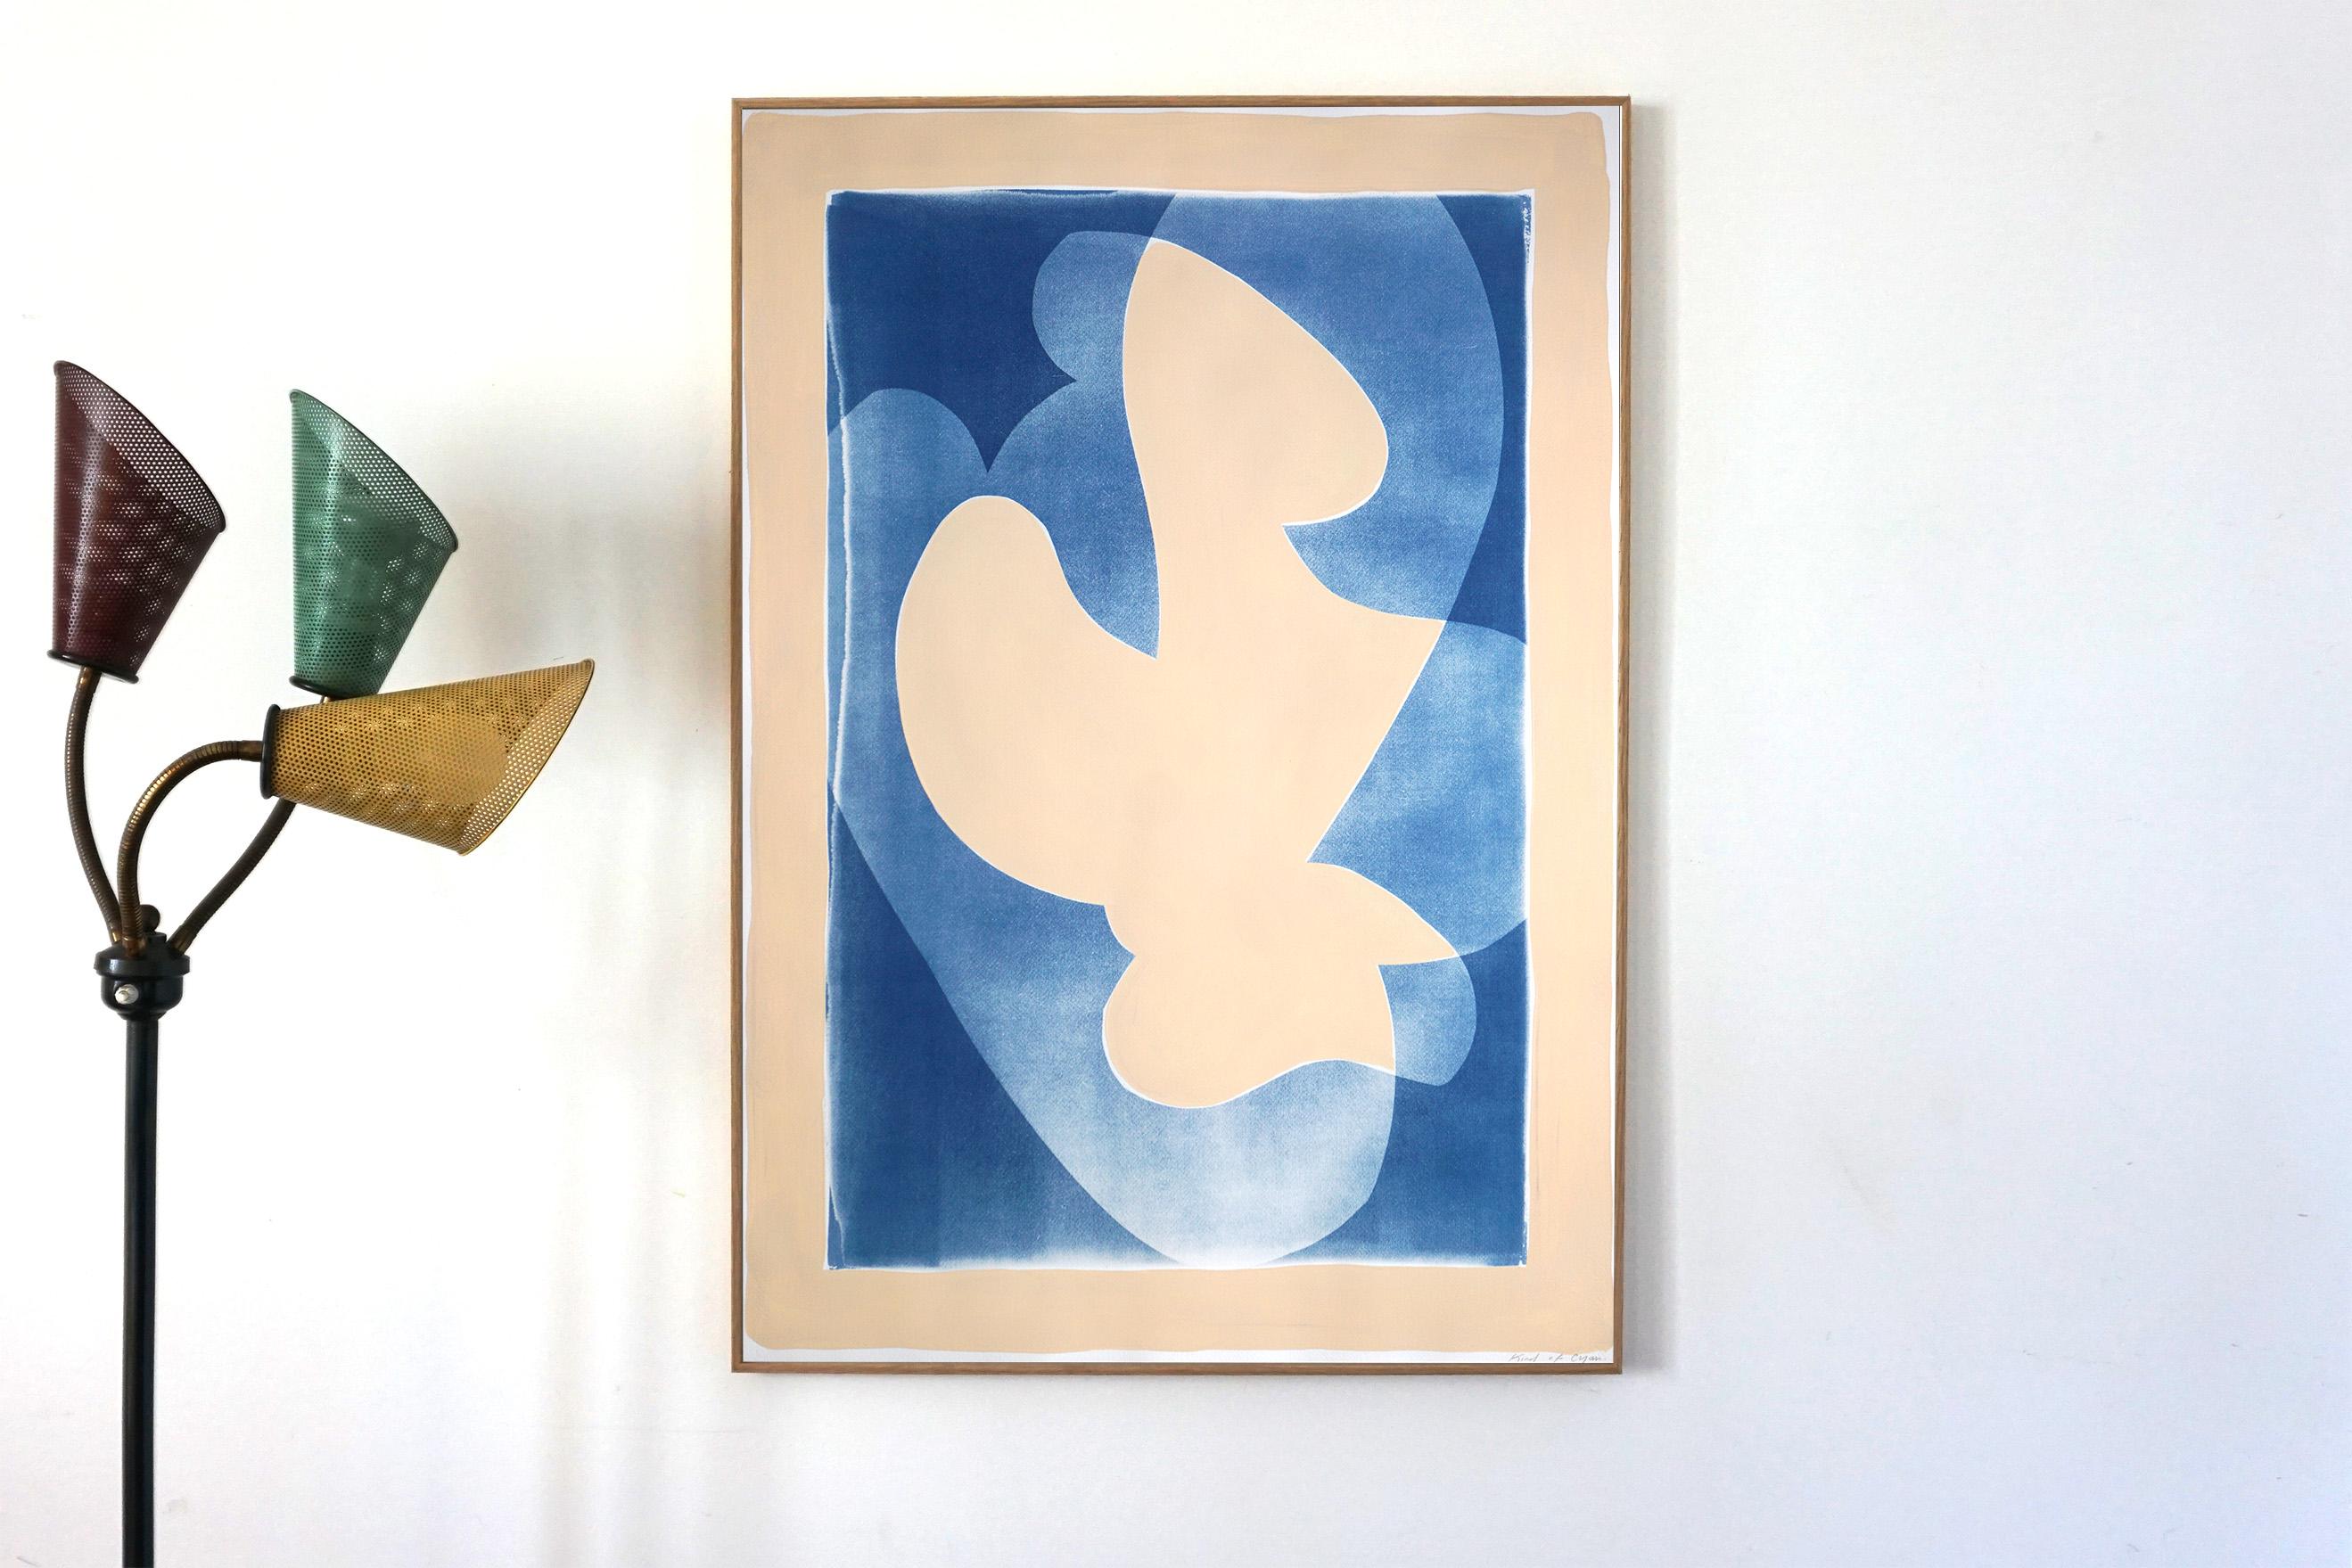 Vanilla Sky, Blue and White Abstract Birds Bodies, Cyanotype Monotype on Paper - Print by Kind of Cyan